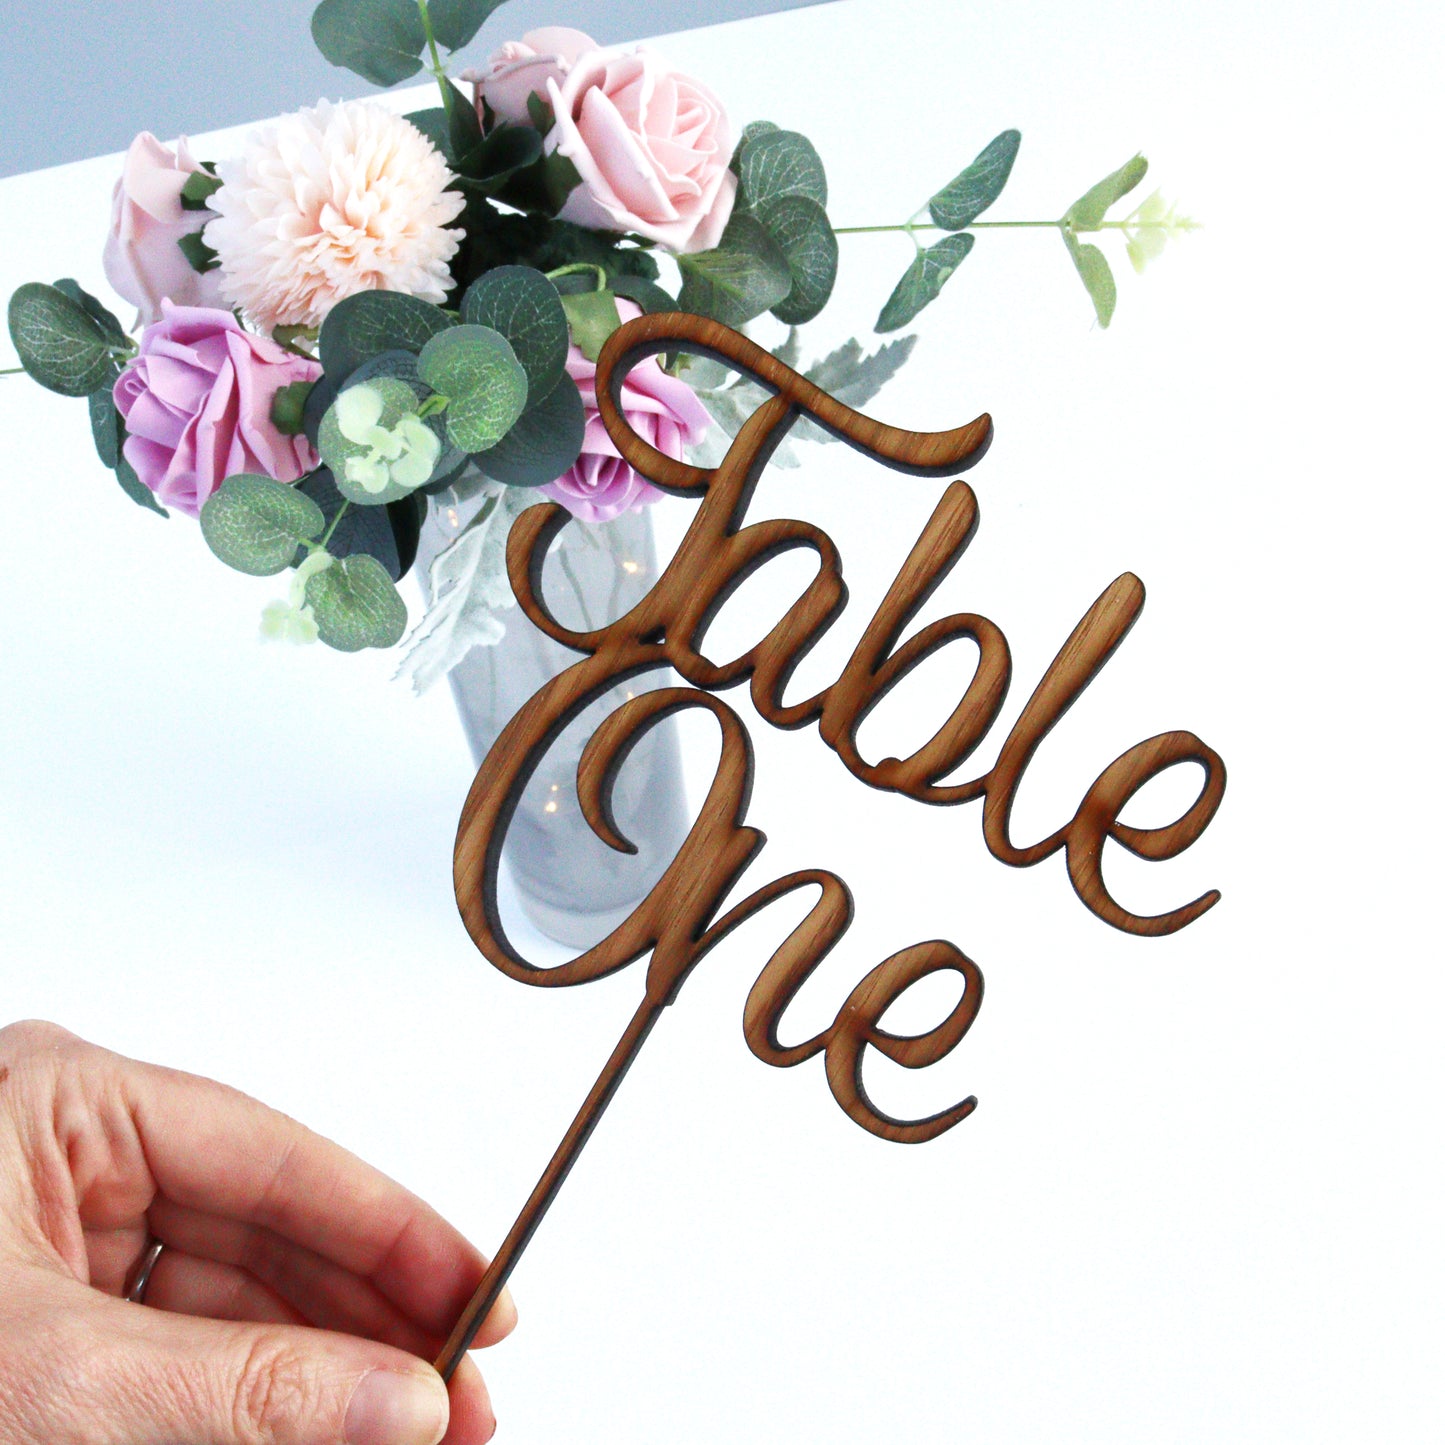 Personalised Wooden Cut Out Wedding Table Names For Centrepieces